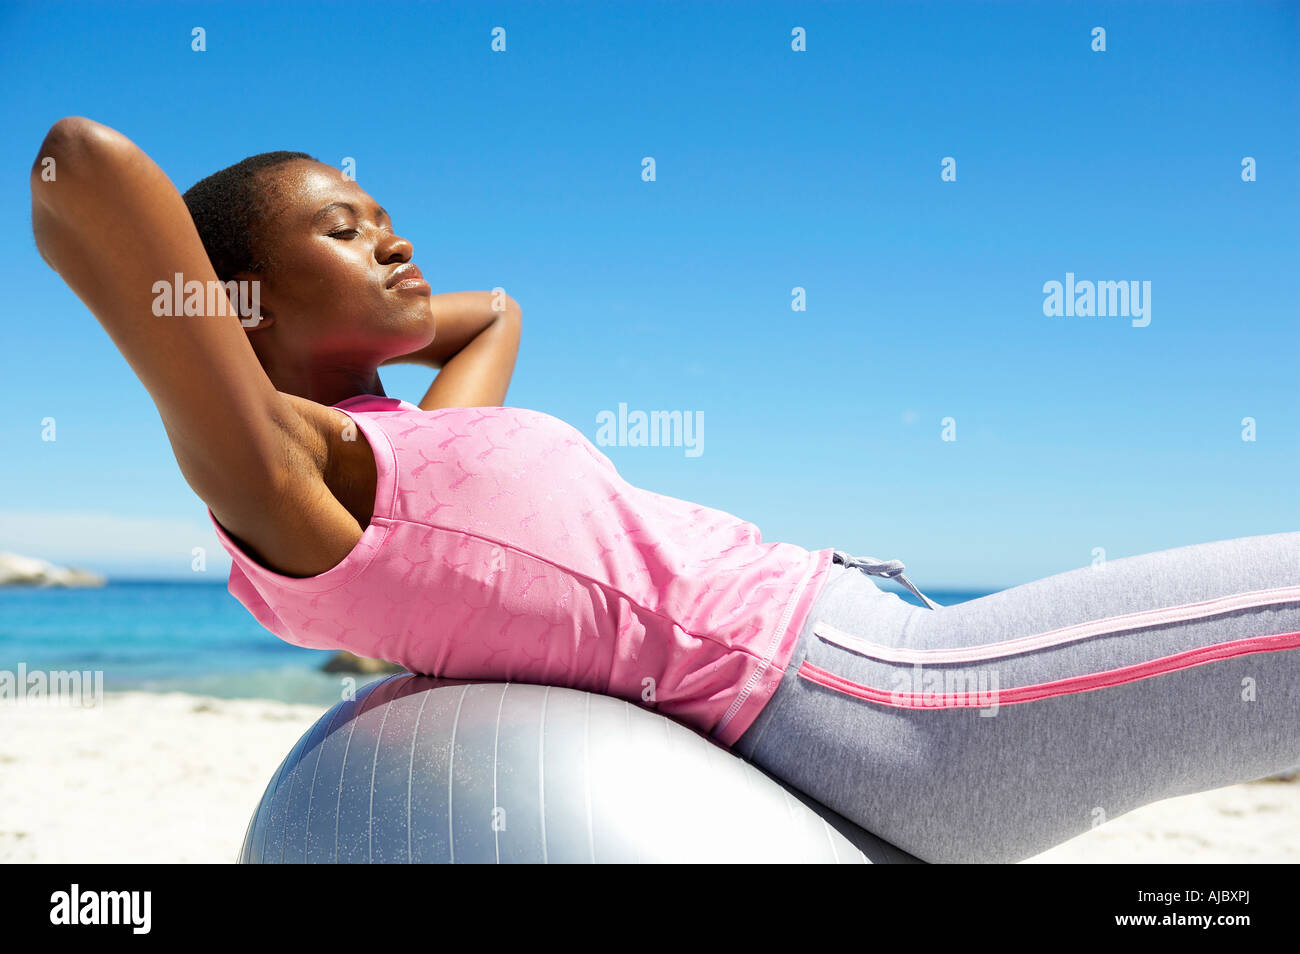 African Woman Exercising on the Beach - Side View Stock Photo